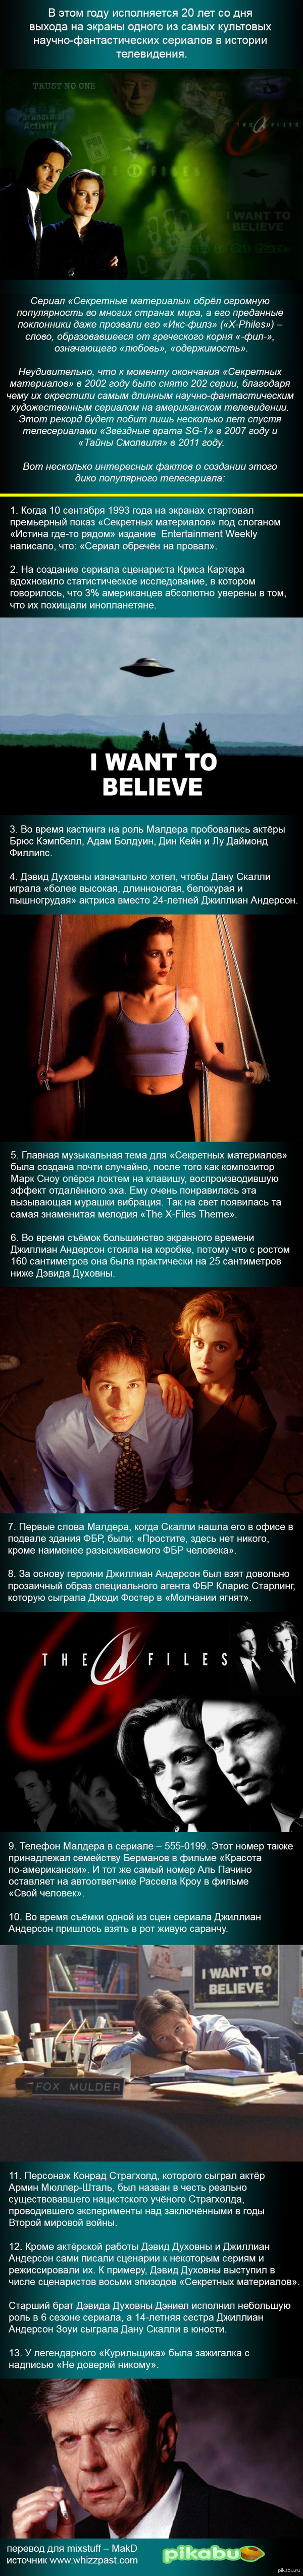 Secret facts about the series The X-Files - Secret materials, Facts, Serials, x-Files, Longpost